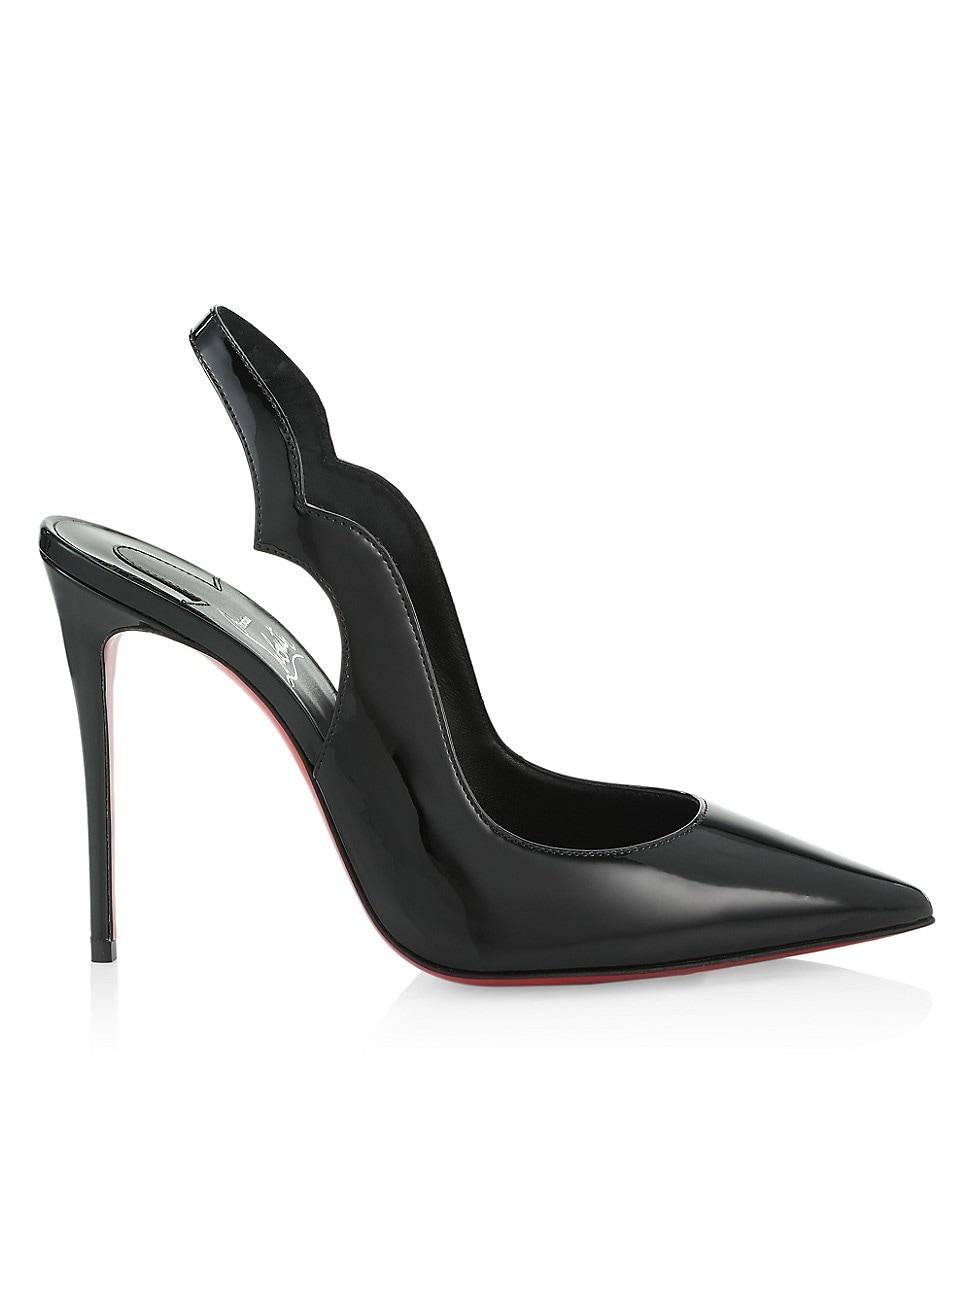 Christian Louboutin Hot Chick 100 Slingback Patent Leather Pumps in ...